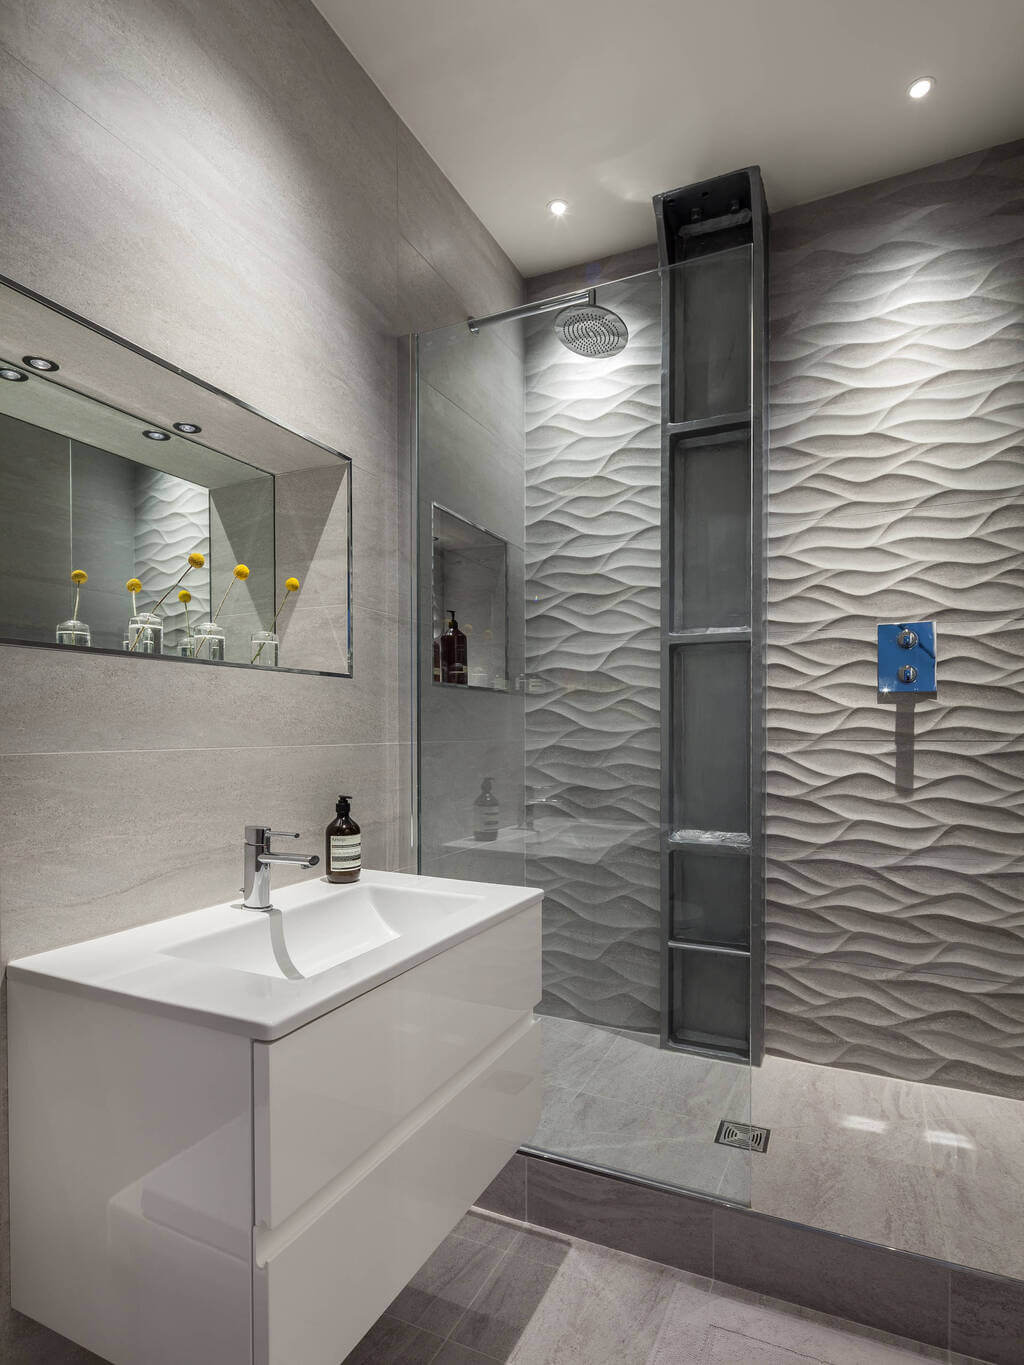 Let the Space Flow, Use Wavy Tiles